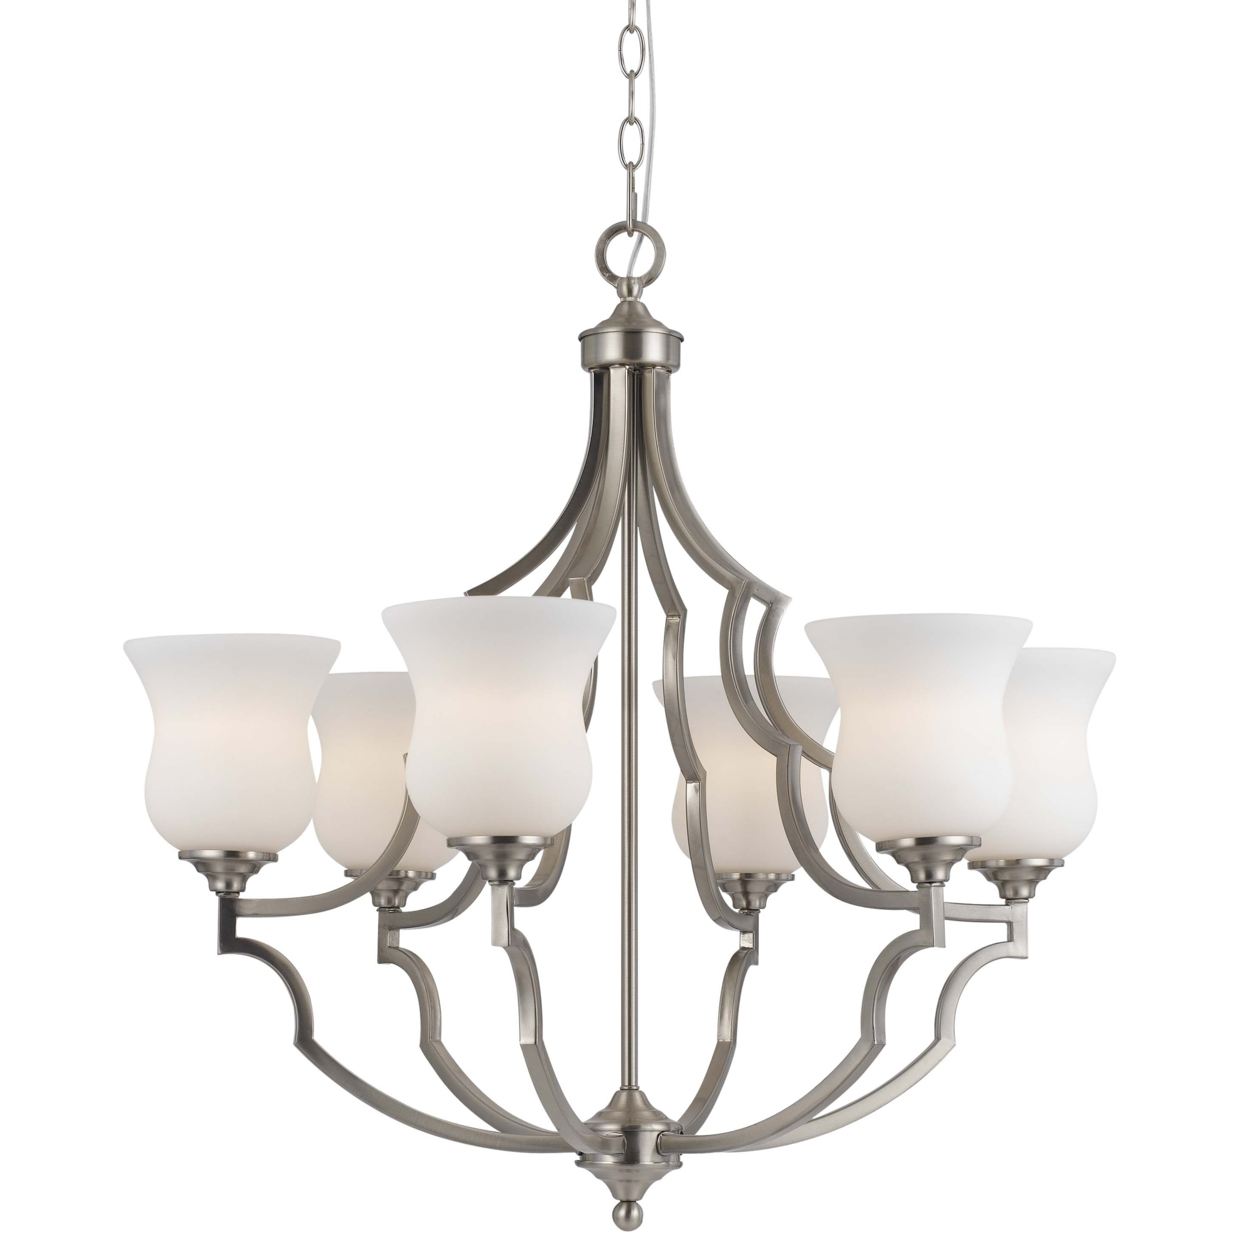 6 Bulb Uplight Chandelier With Metal Frame And Glass Shades,Silver And White- Saltoro Sherpi